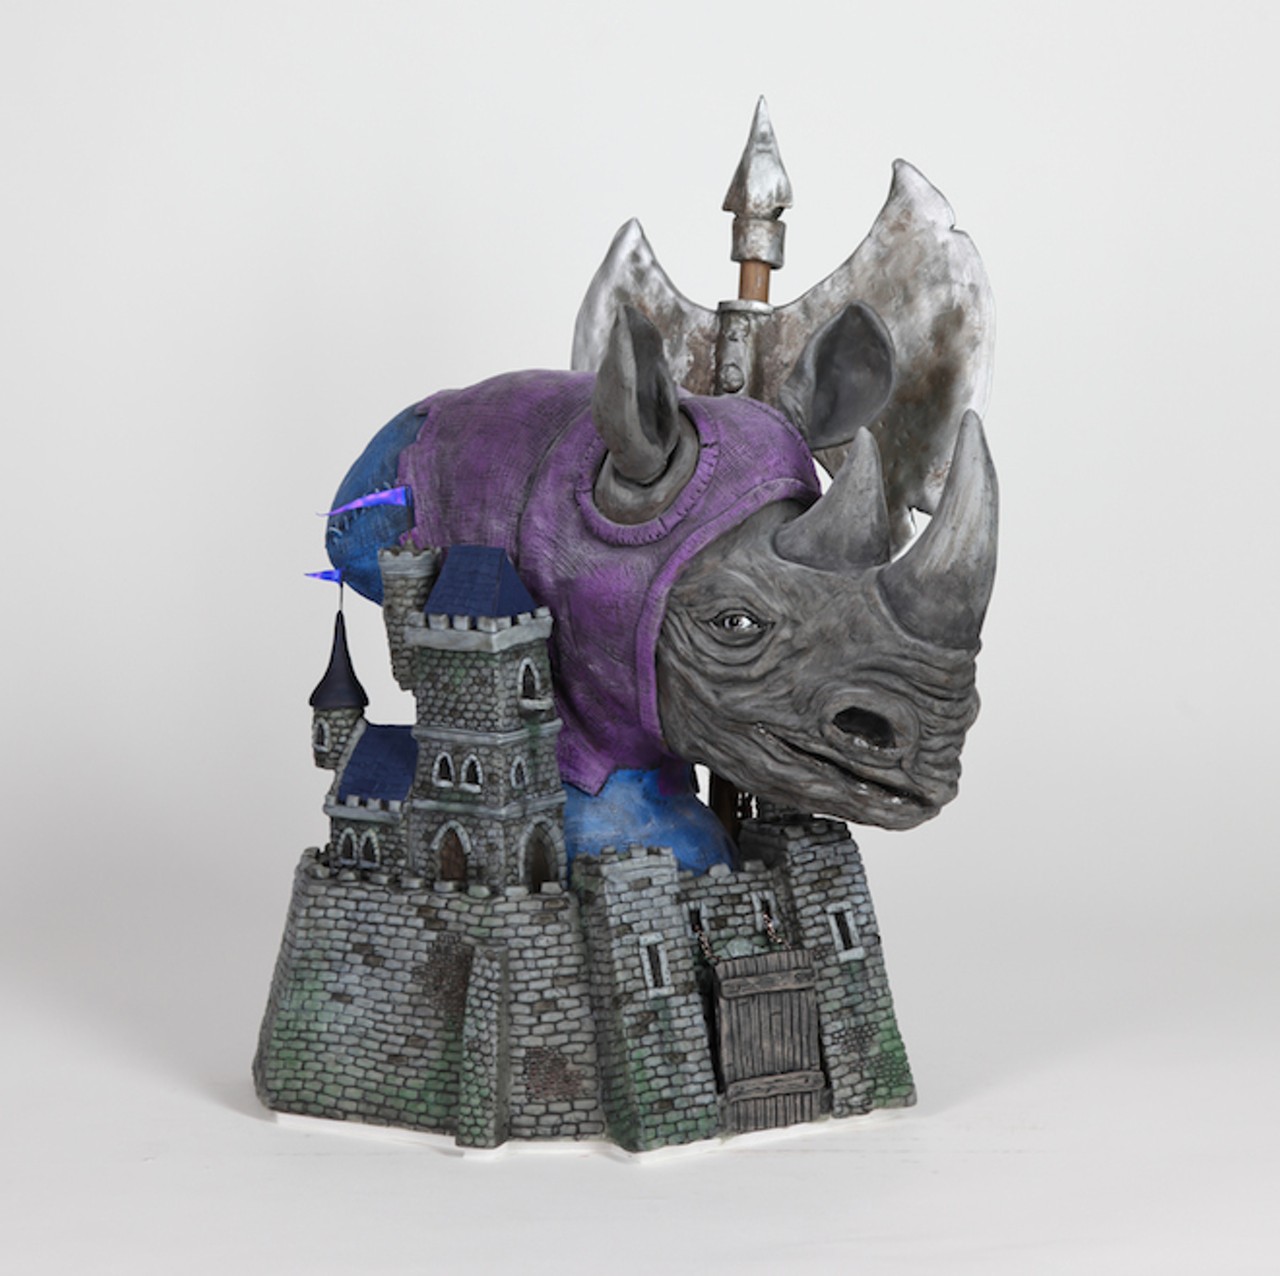 Thursday, Sept. 18The Horns and Heroes Project No. 2A group of artists decorate rhino sculptures to benefit the International Rhino Foundation.Image: Ray Keim